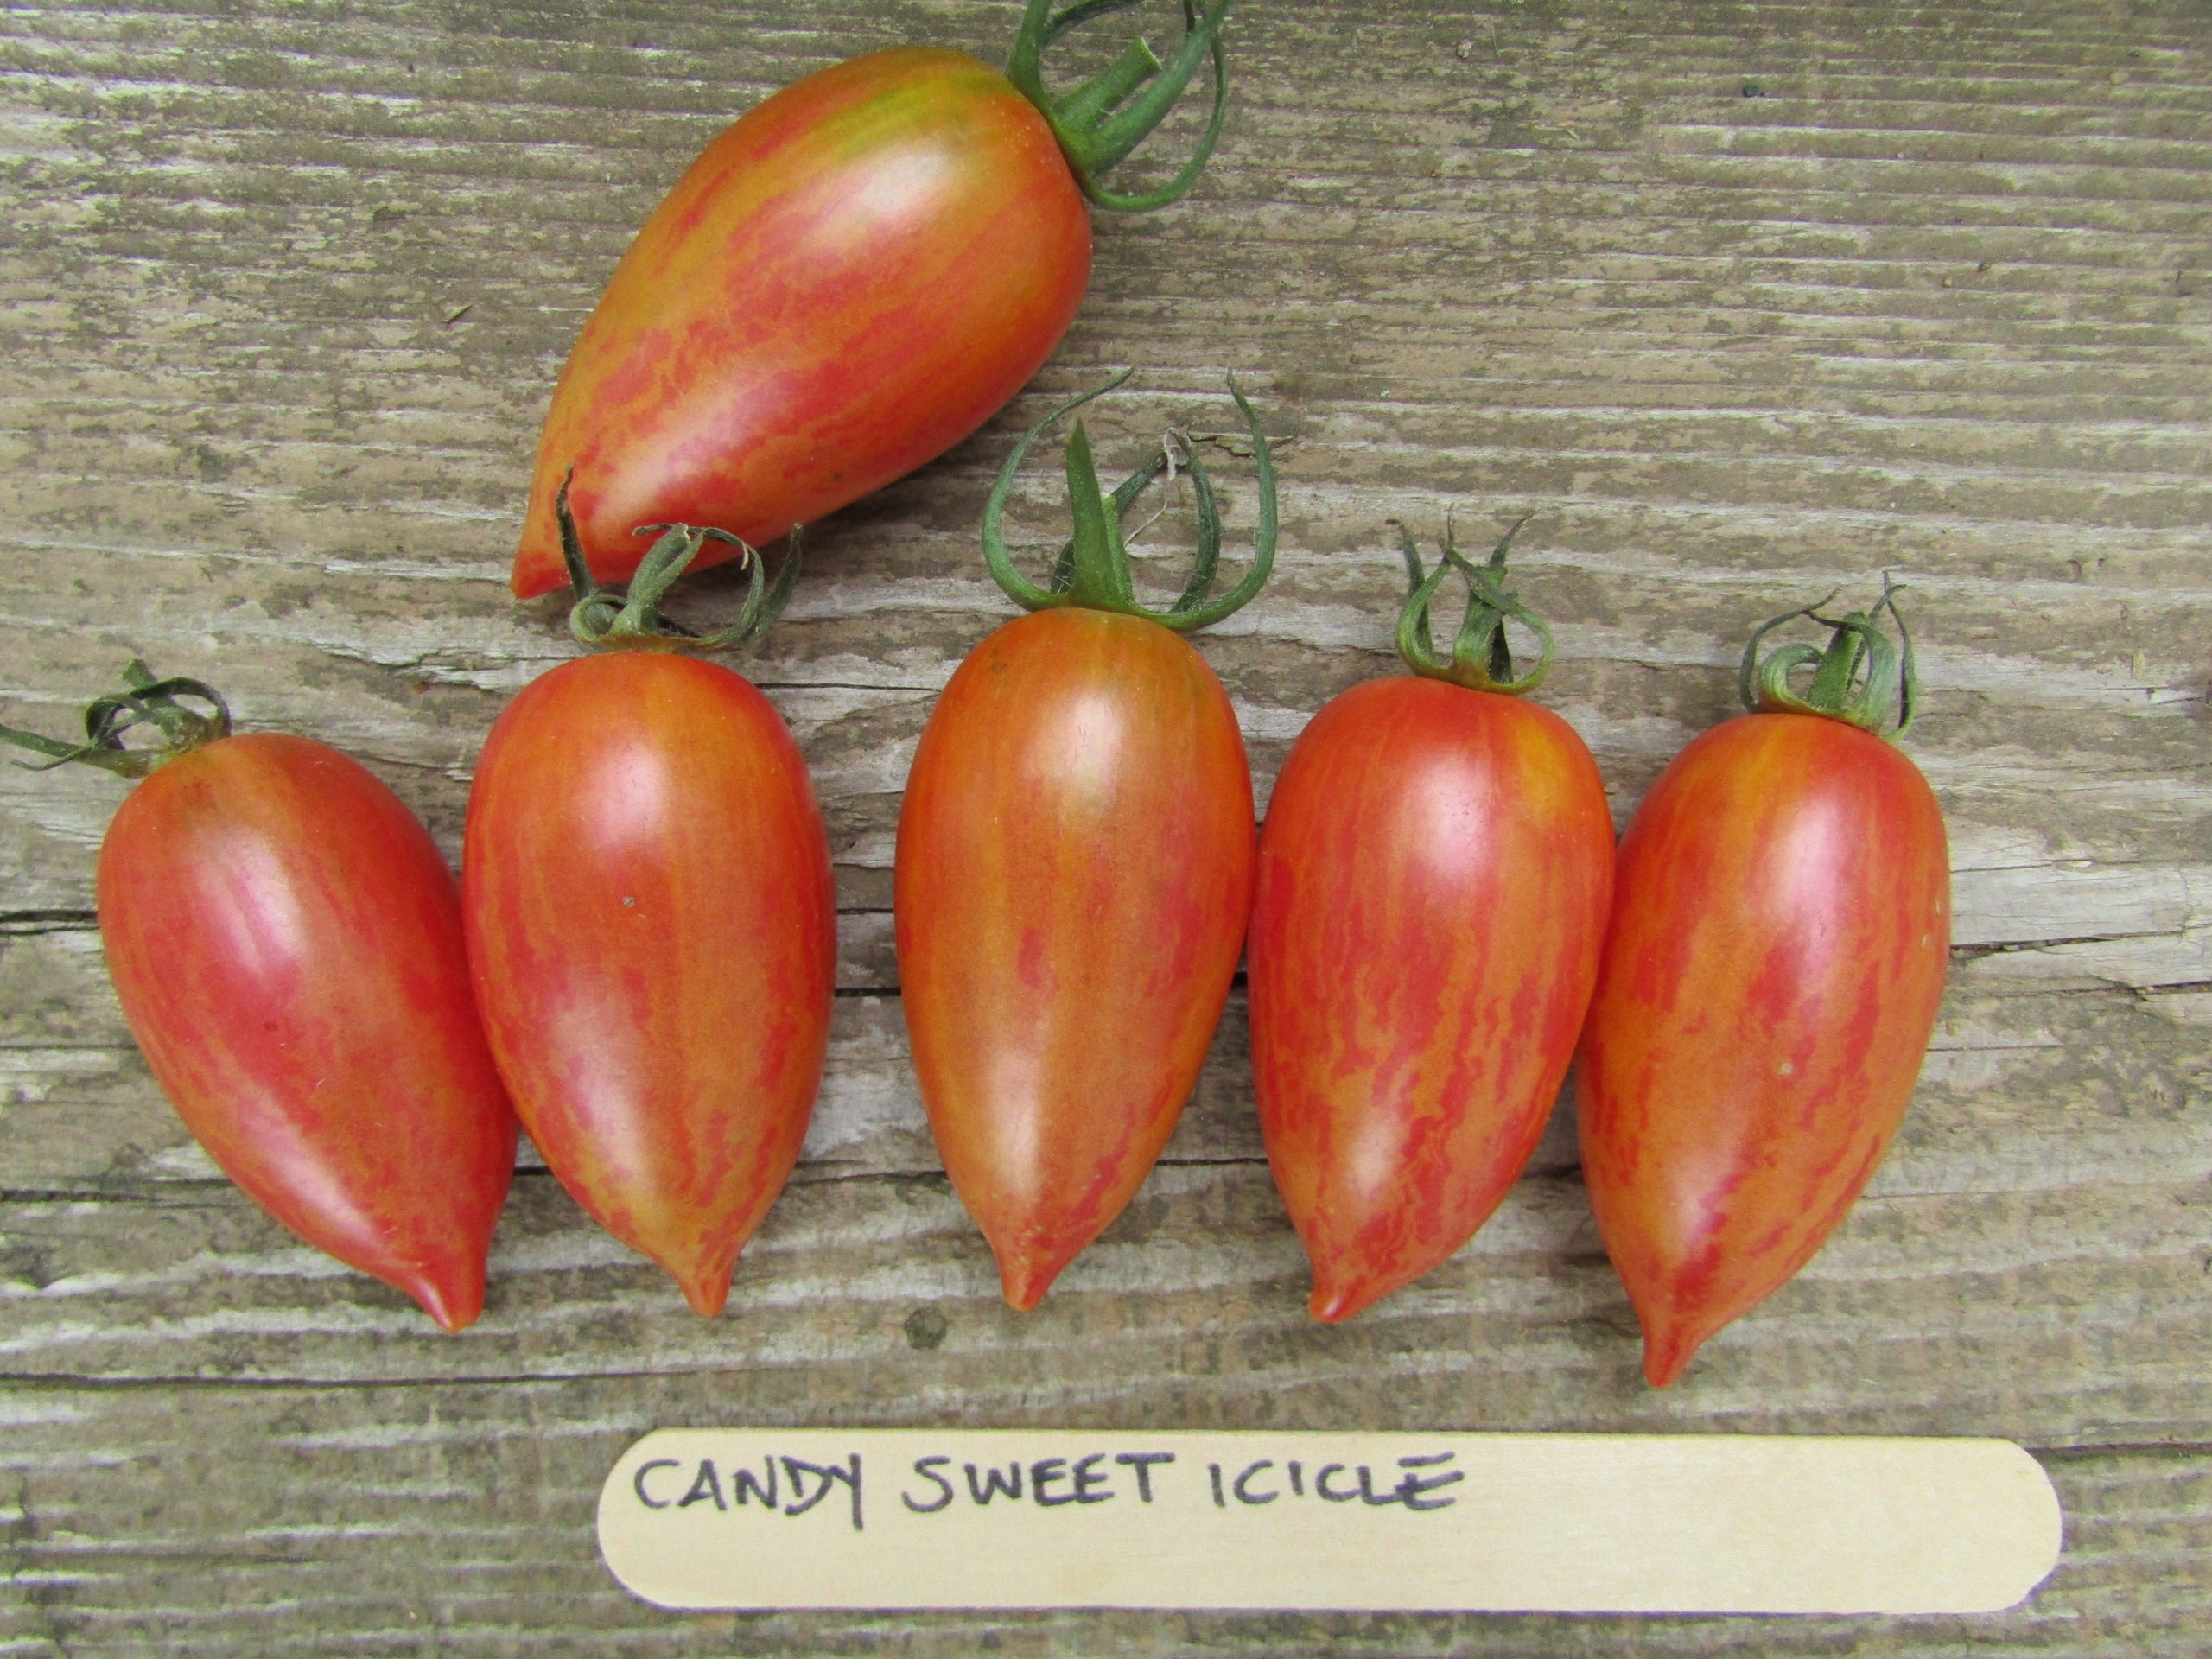 Candy Sweet Icicle Indeterminate Tomato Seeds